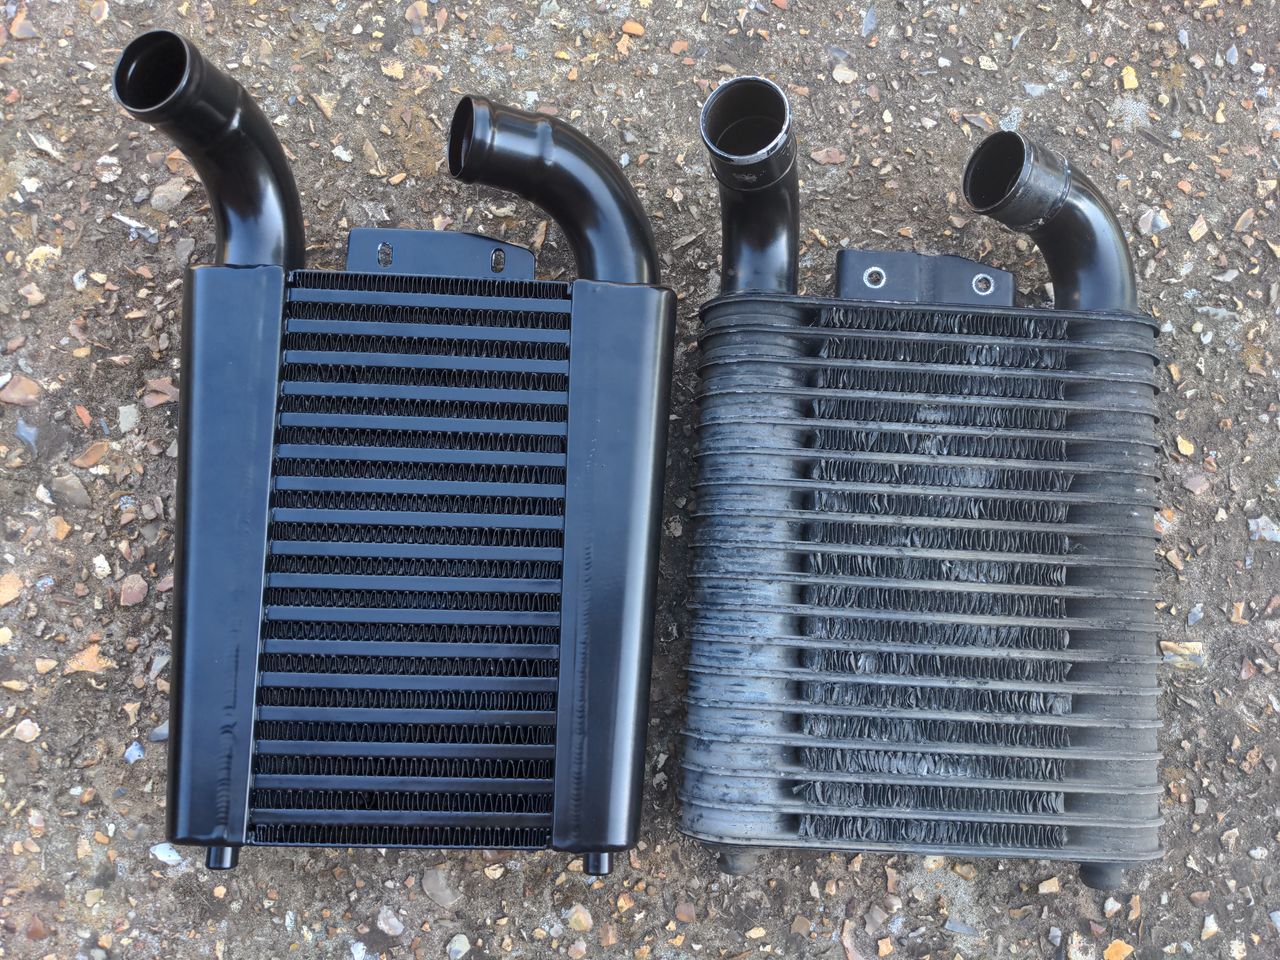 Pro Alloy 323 GTX intercooler vs the stock unit. The Pro Alloy unit is very obviously a more capable unit which can flow more. The old one has many bent fins.